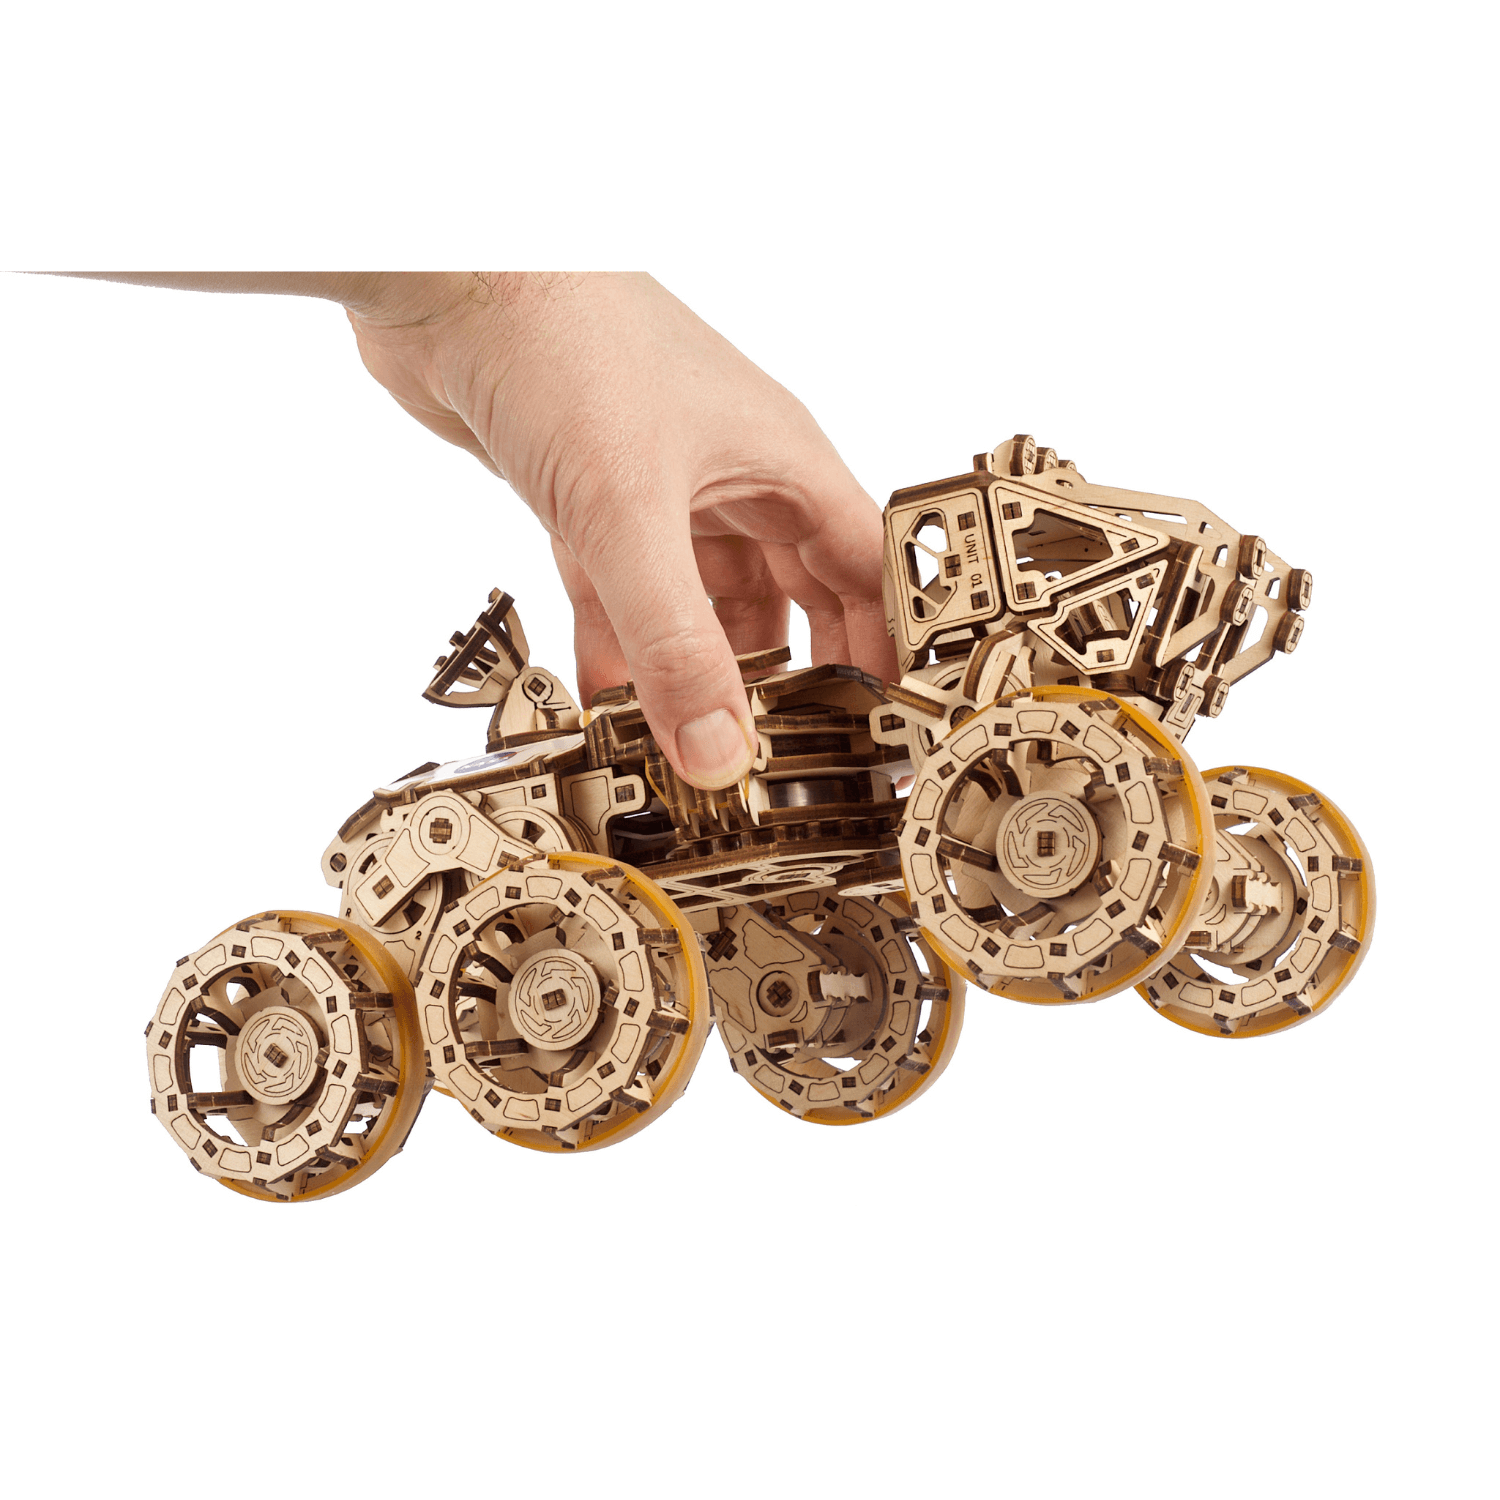 Manned Mars Rover Mechanical Wooden Puzzle Ugears--